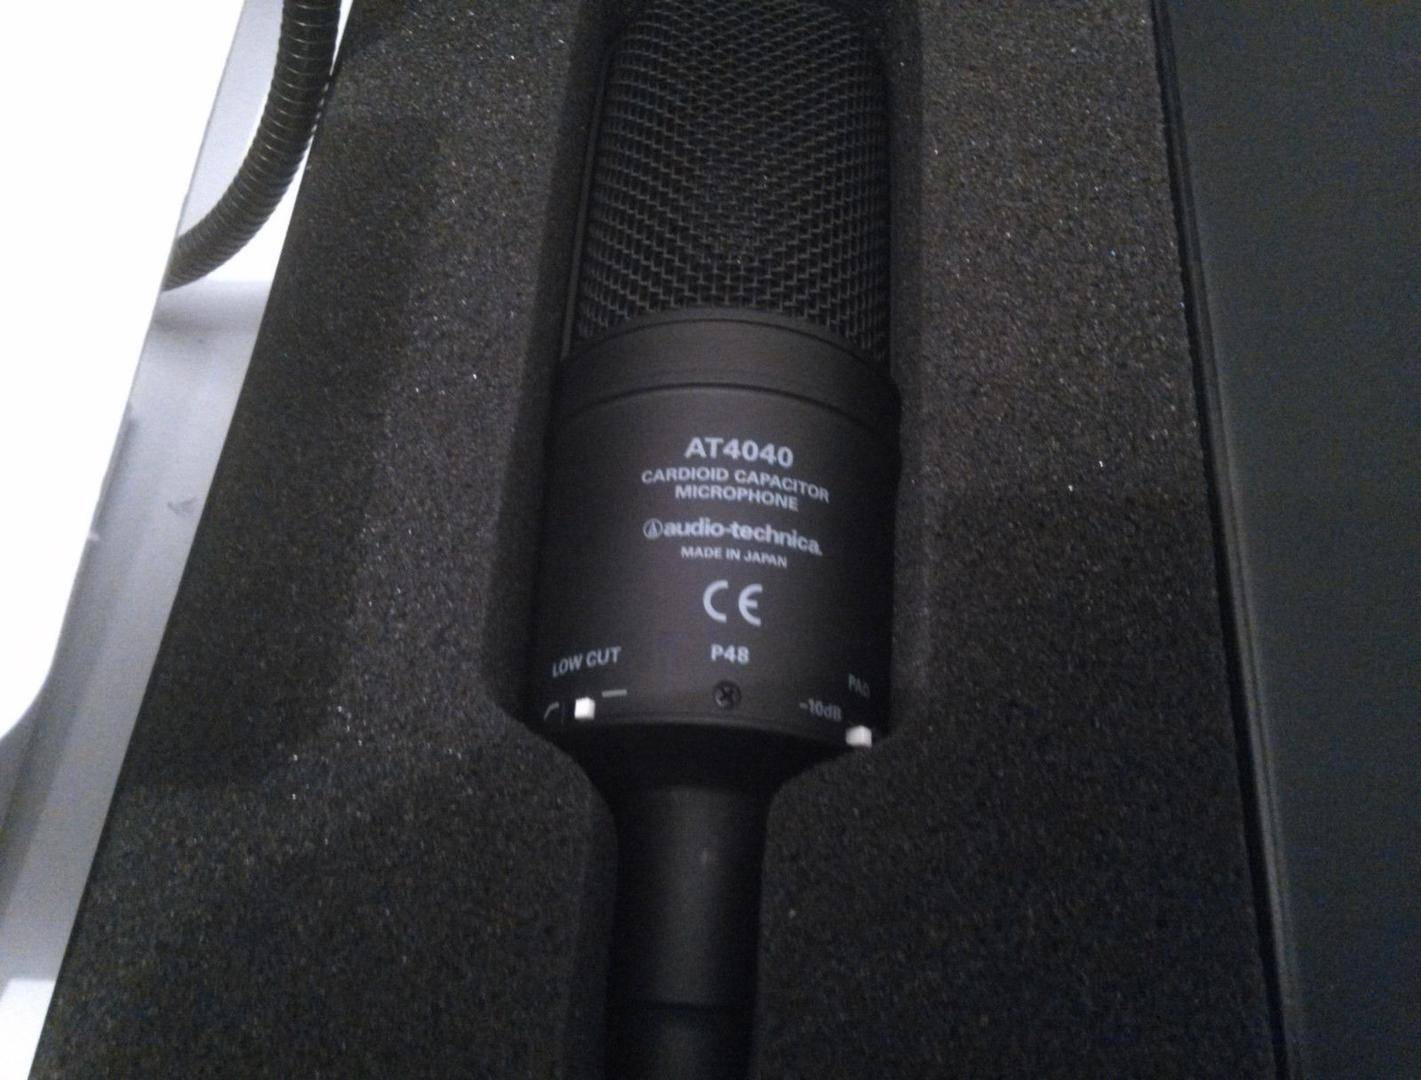 Audio-technica AT4040 is Durable and Reliable